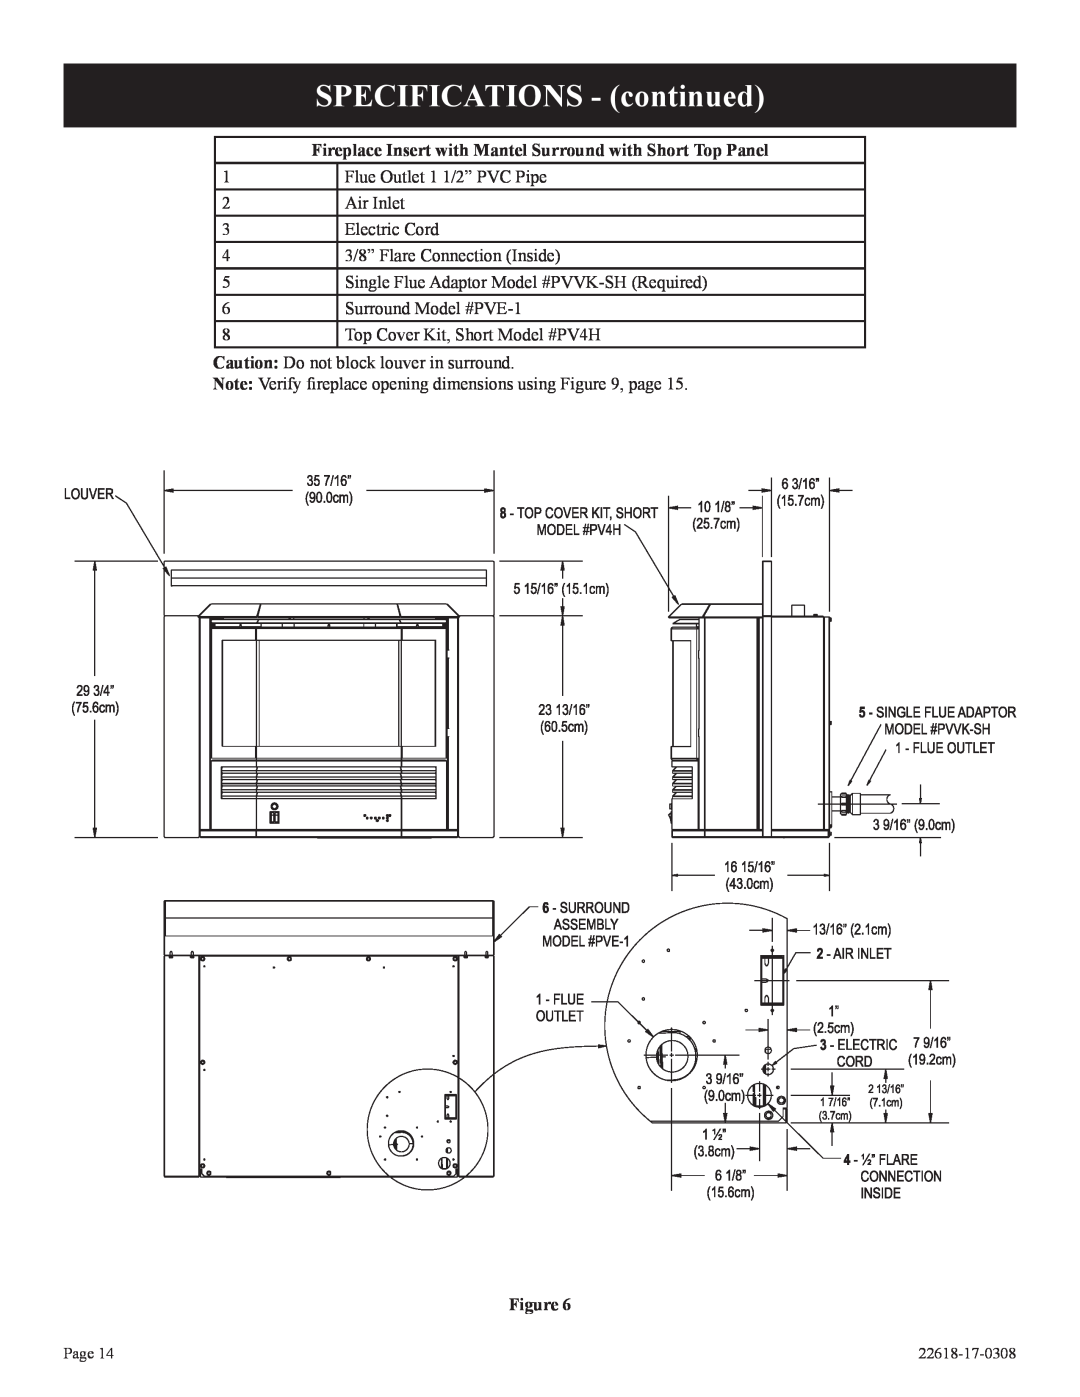 Empire Comfort Systems GN, CP SPECIFICATIONS - continued, 1Flue Outlet 1 1/2” PVC Pipe 2Air Inlet, 6Surround Model #PVE-1 